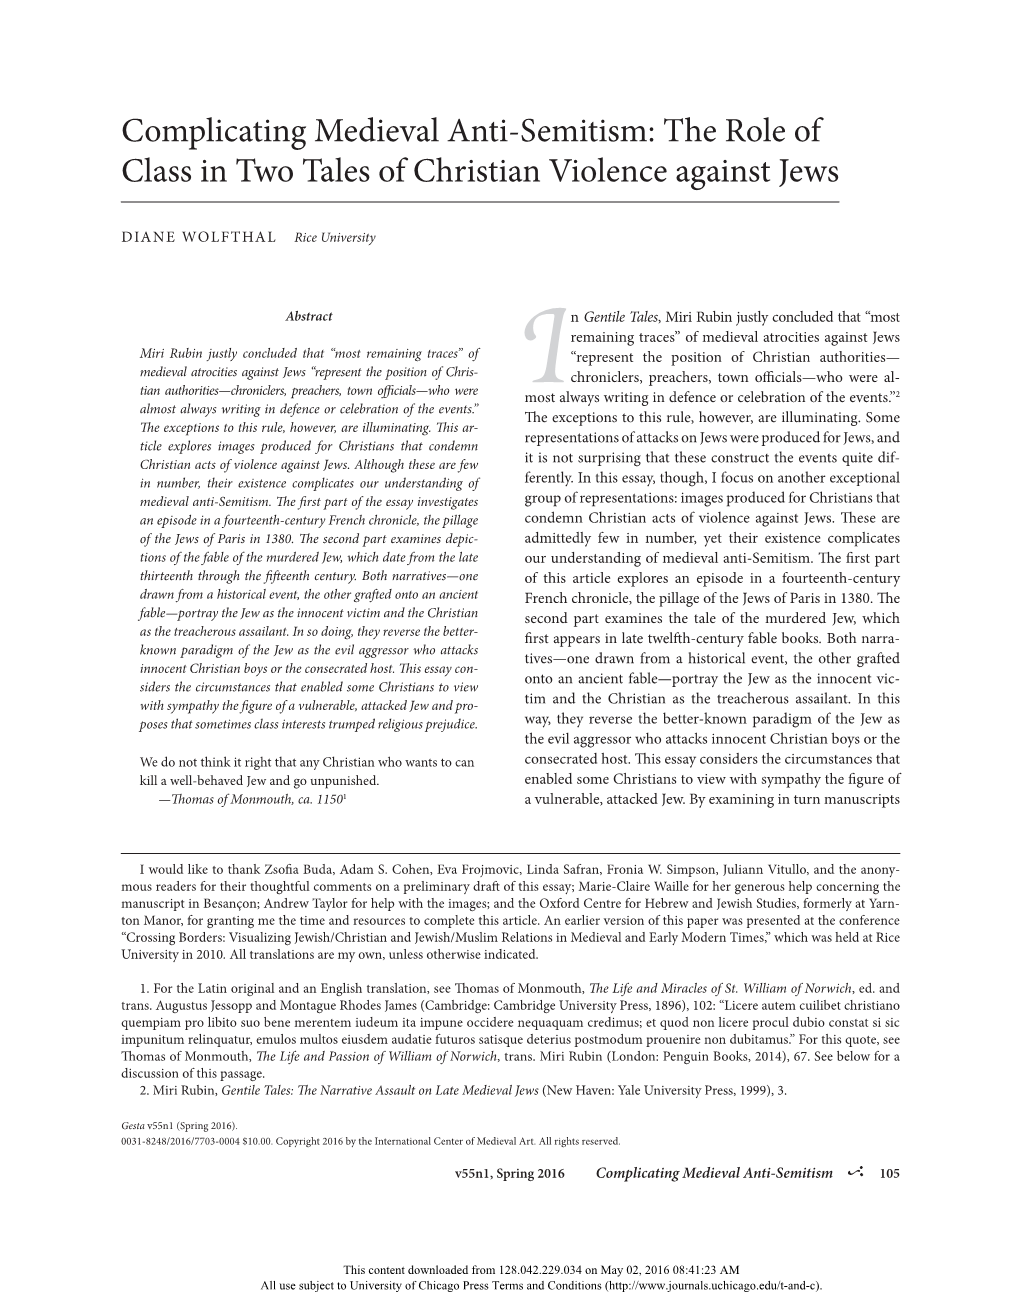 Complicating Medieval Anti-Semitism: the Role of Class in Two Tales of Christian Violence Against Jews